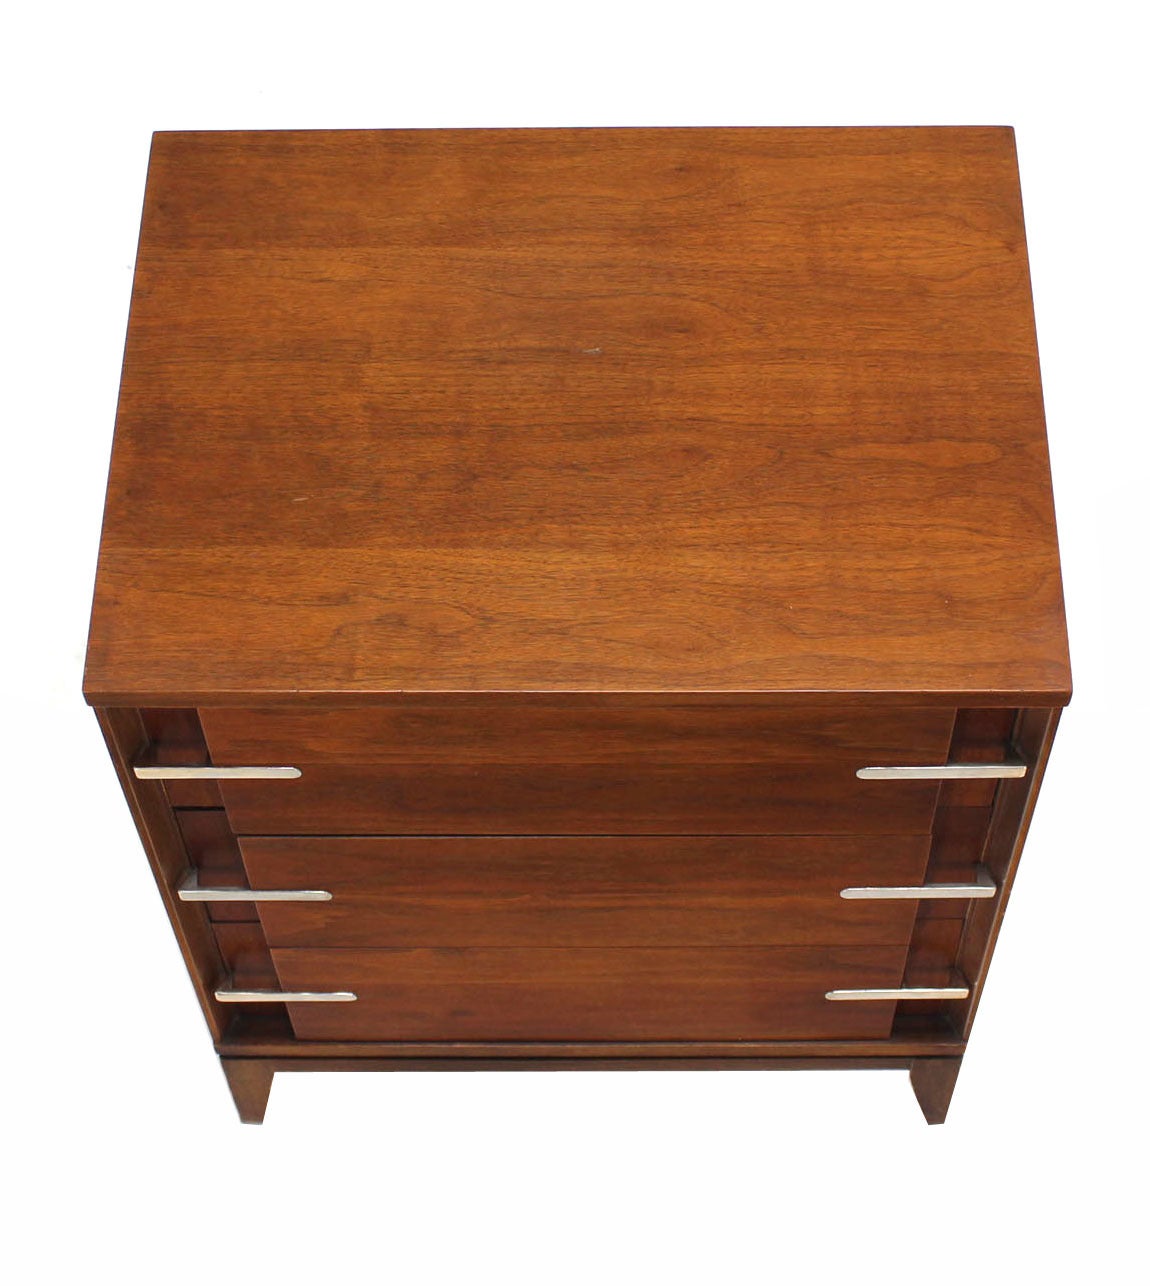 American Mid-Century Modern Walnut Bachelor Chest or Dresser with Accent Drawer Pulls